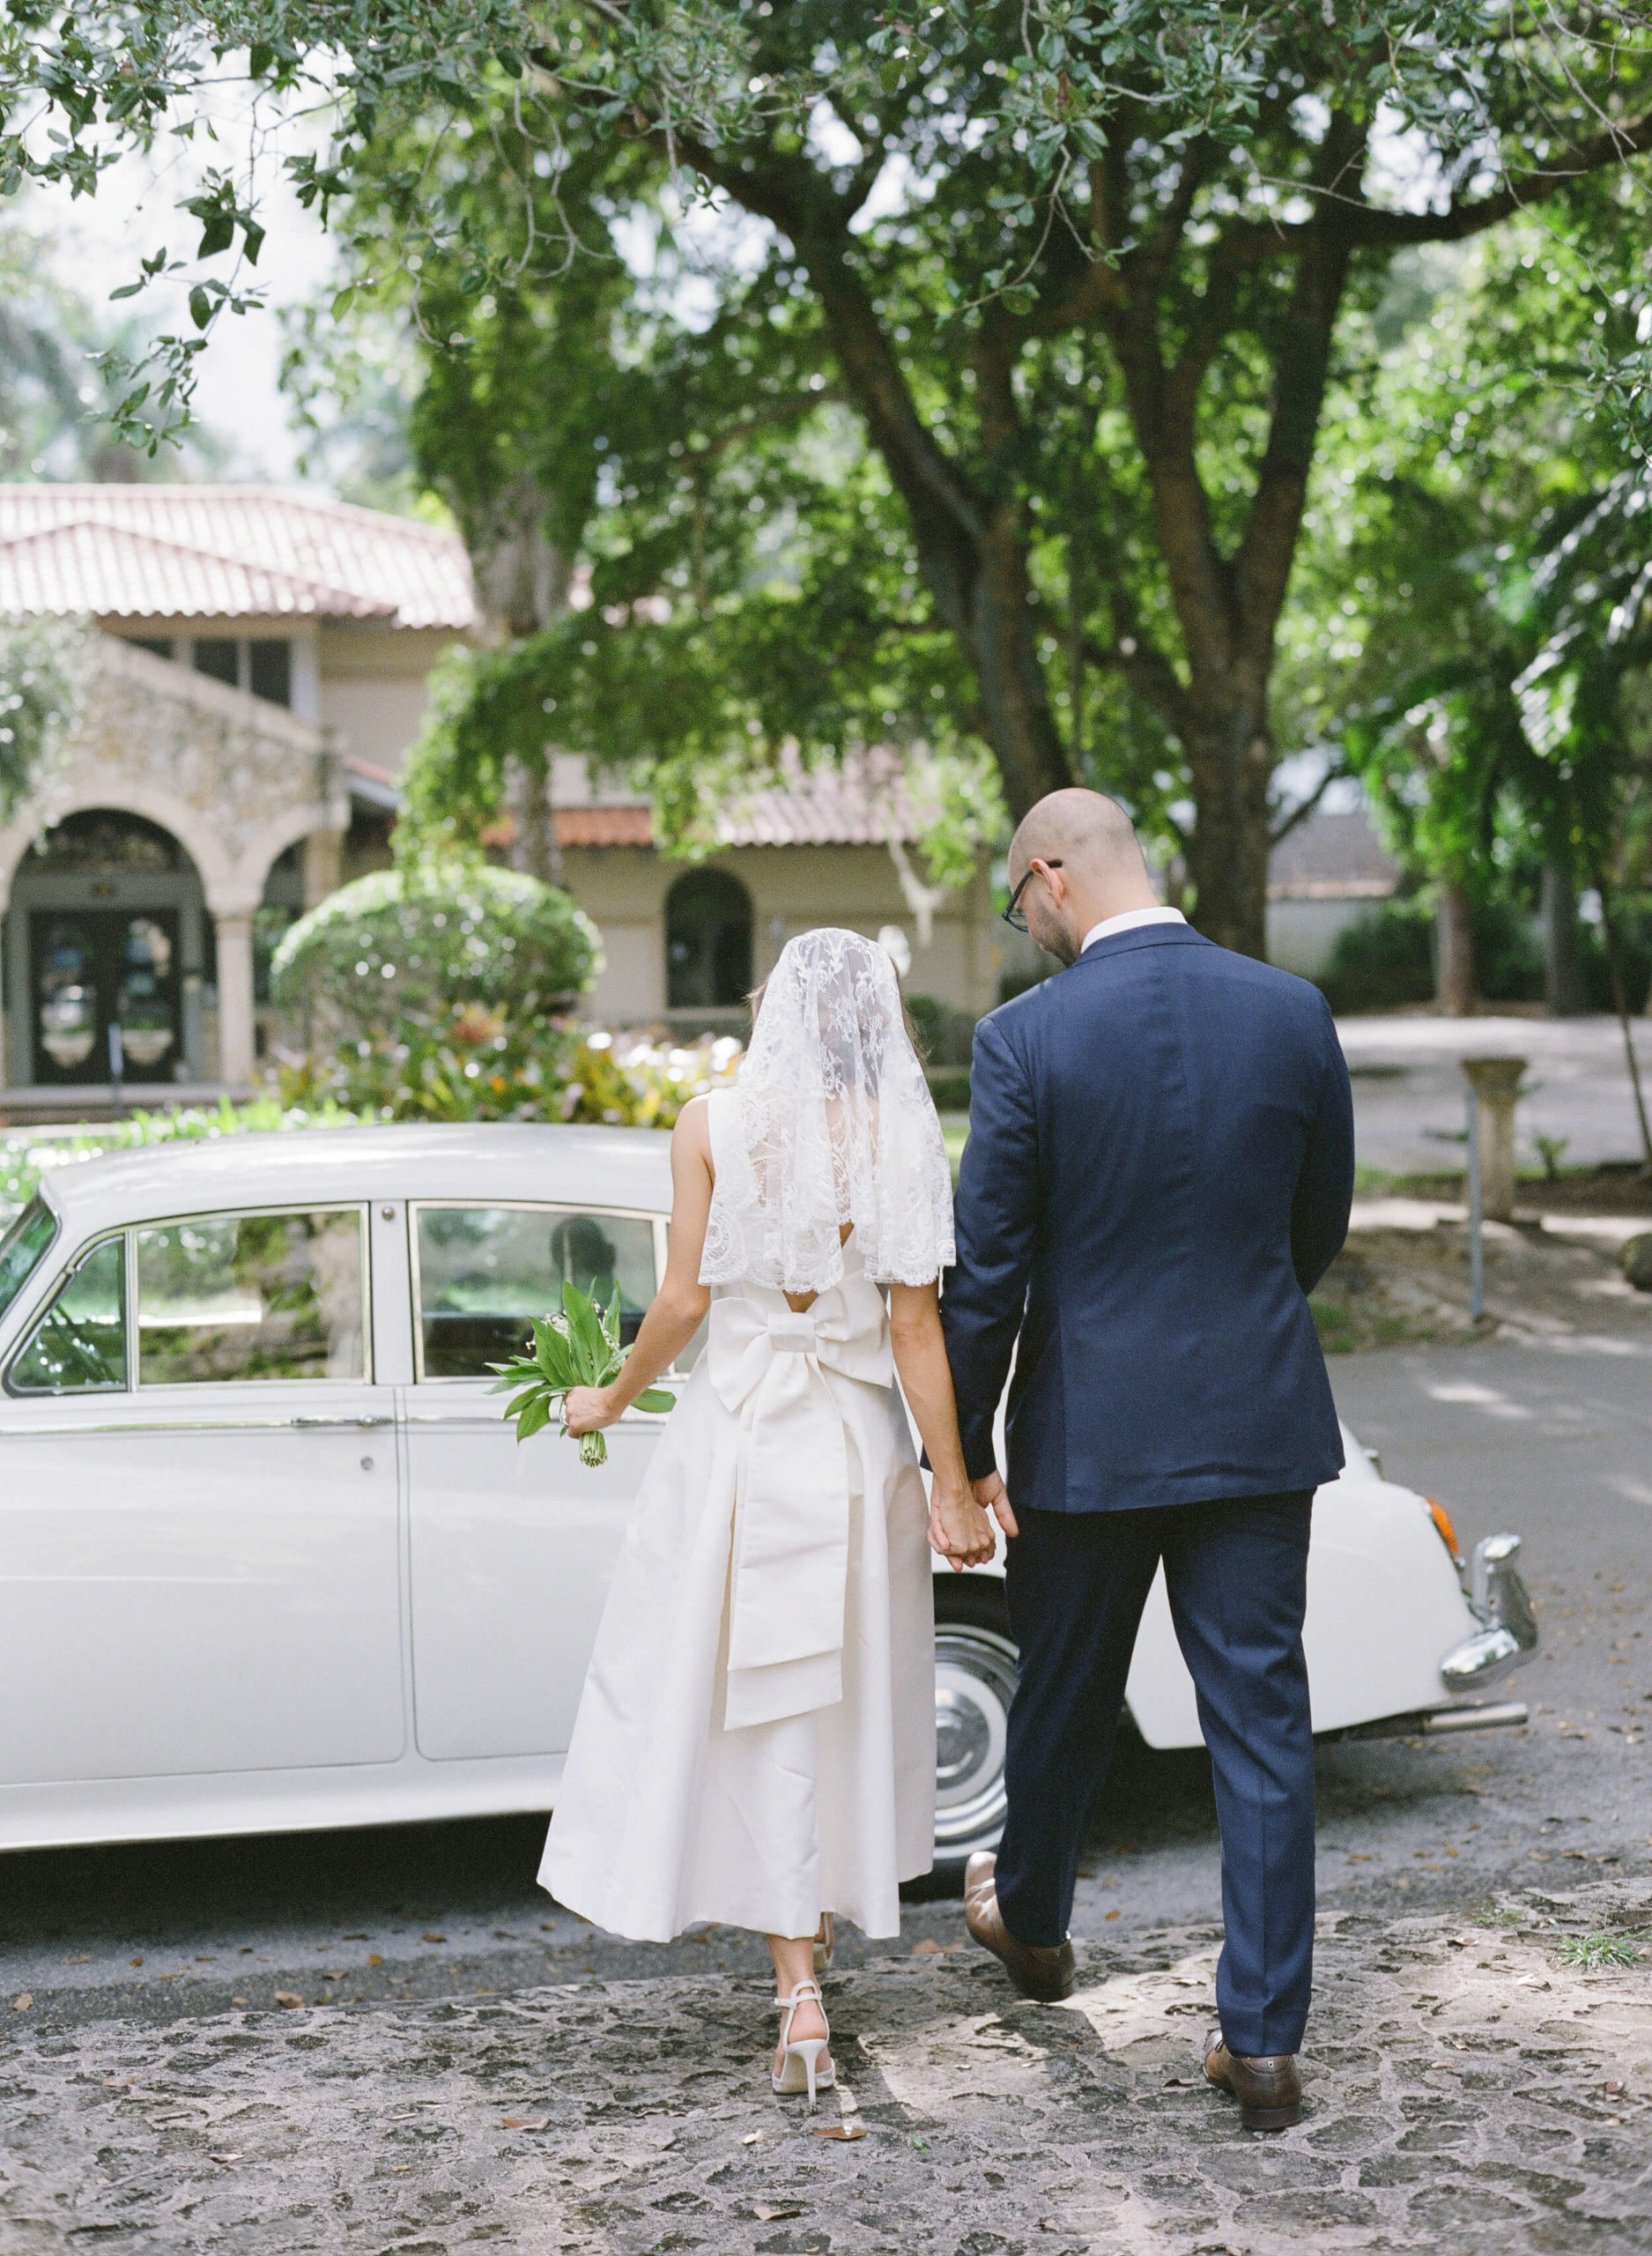 Bride and groom walking to their getaway car after their Miami wedding ceremony.